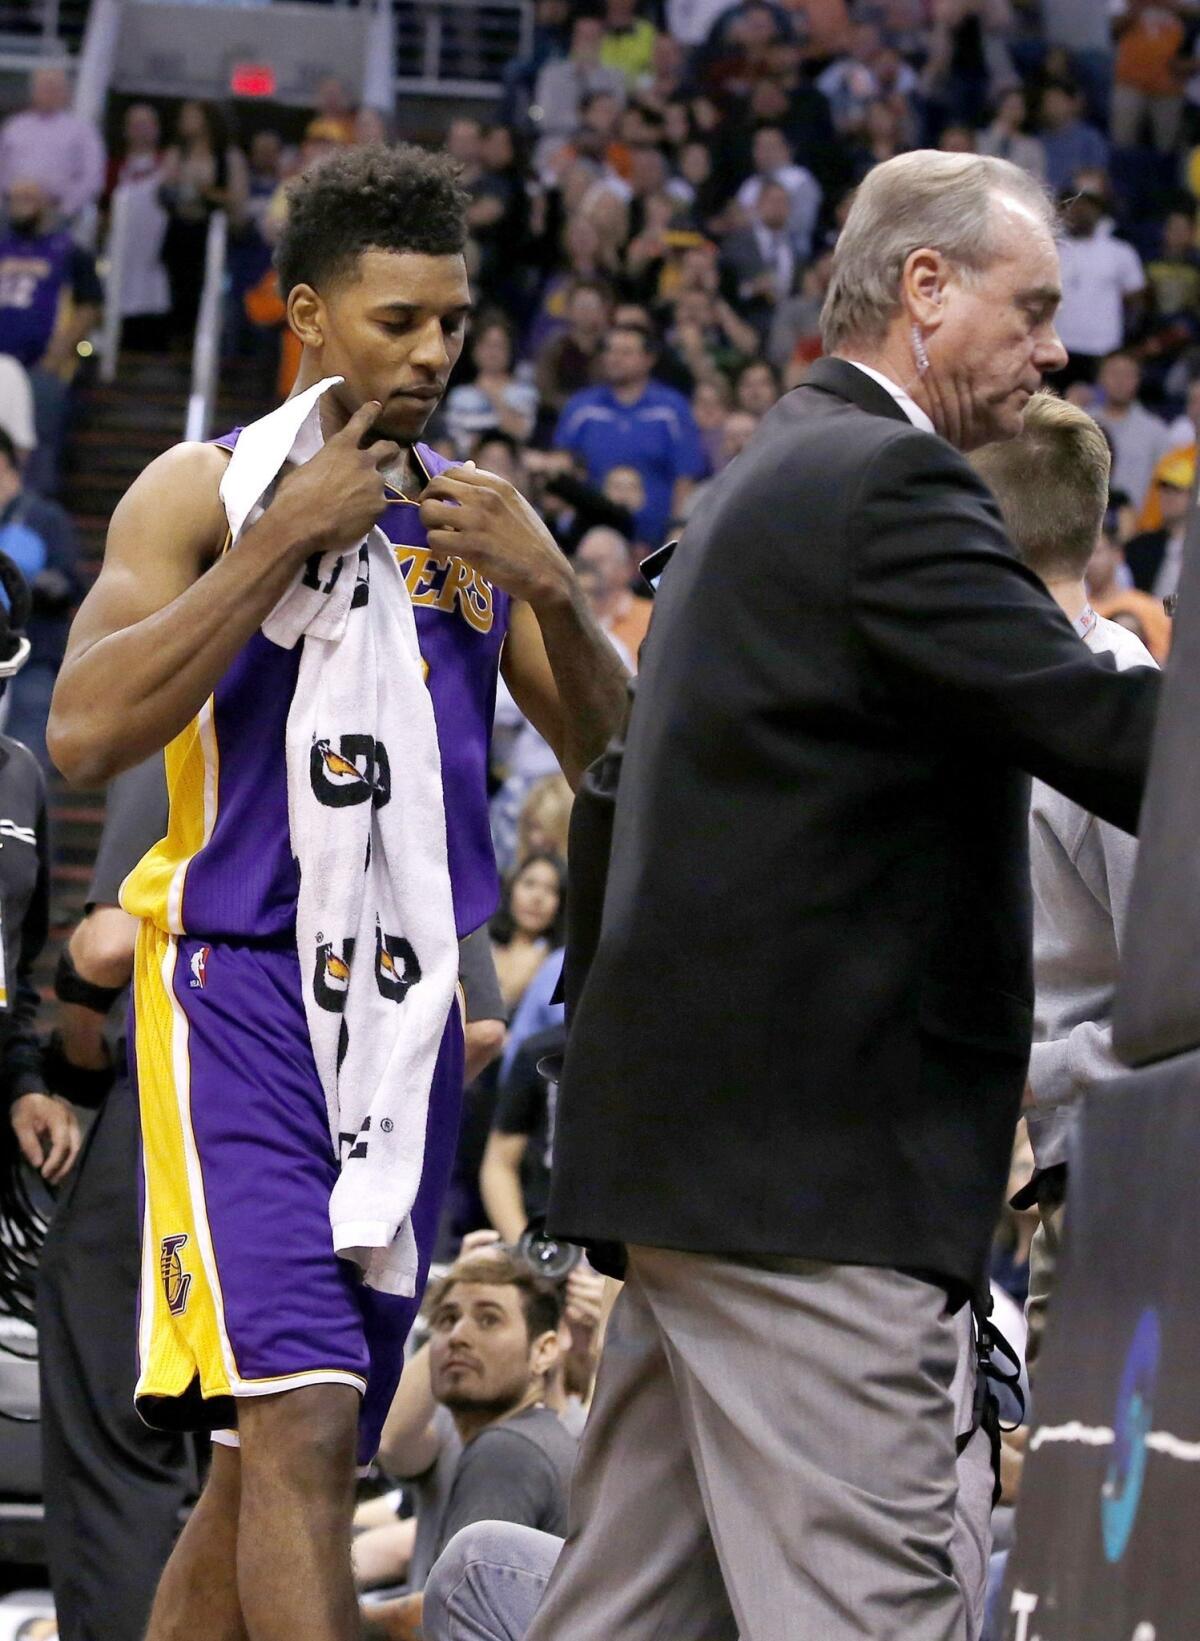 Lakers small forward Nick Young is escorted from the court after being involved in a scuffle during the first half of Wednesday's game against the Phoenix Suns.